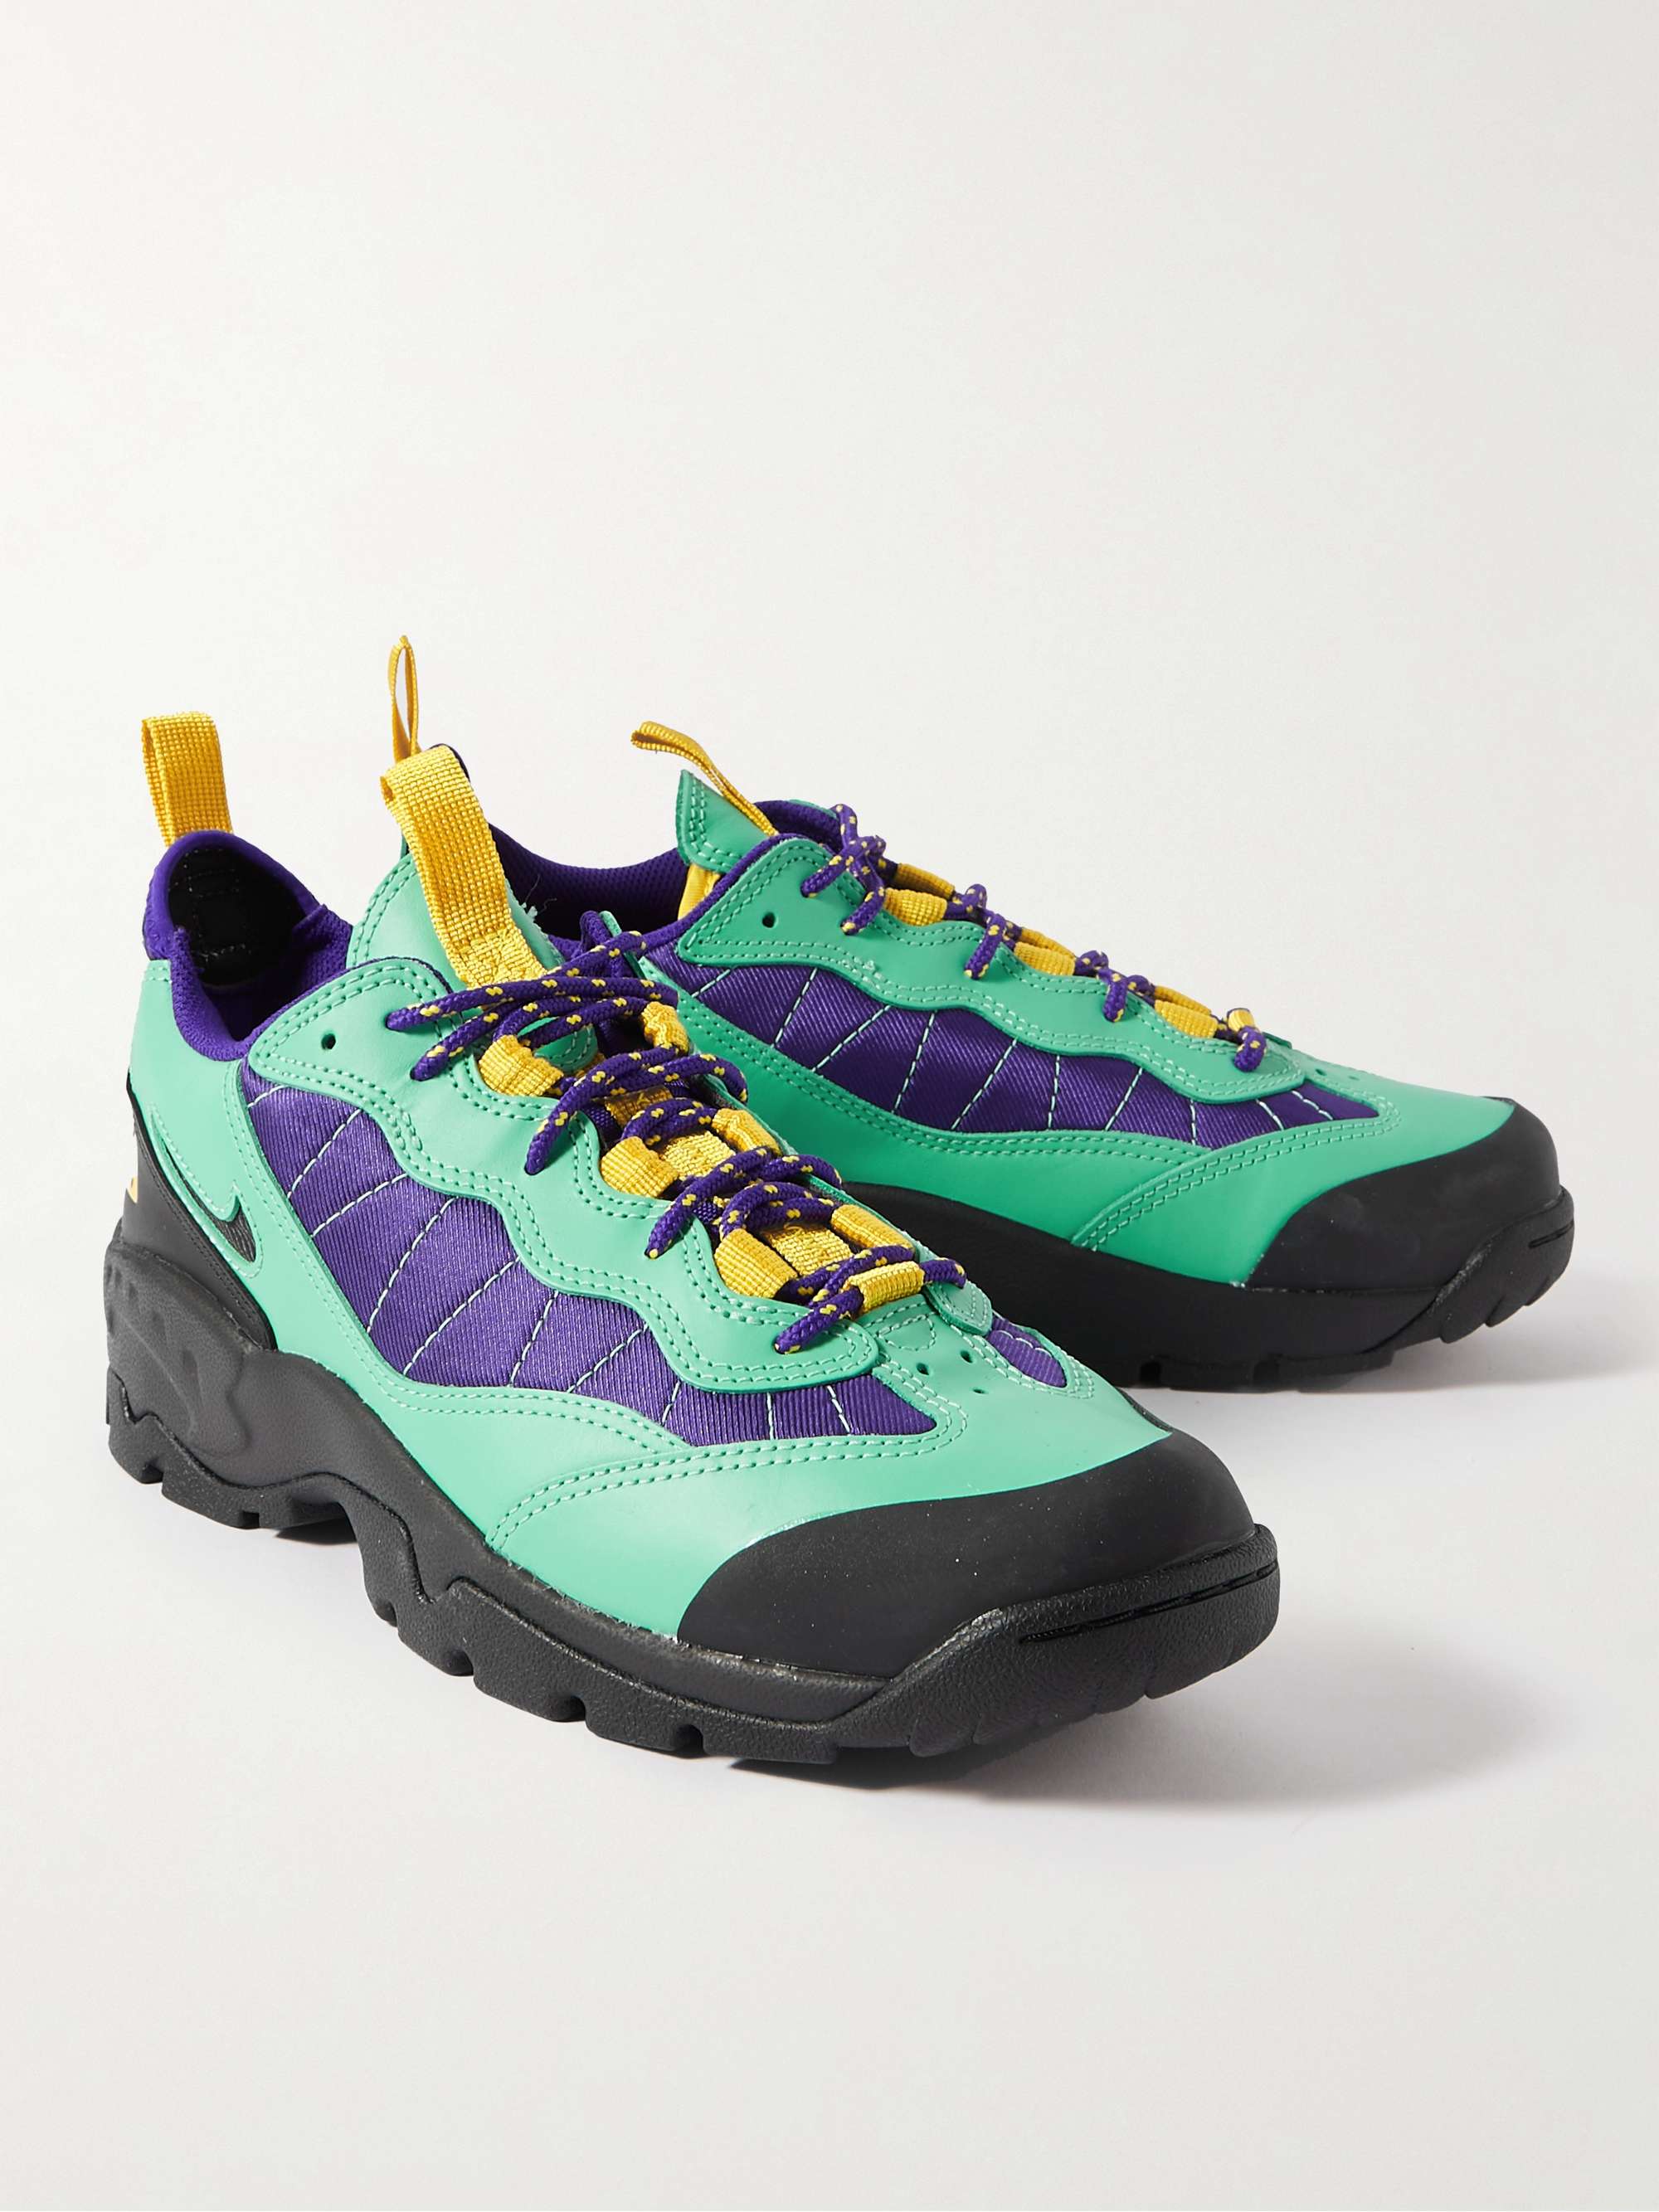 NIKE ACG Air Mada Rubber-Trimmed Leather and Mesh Hiking Sneakers